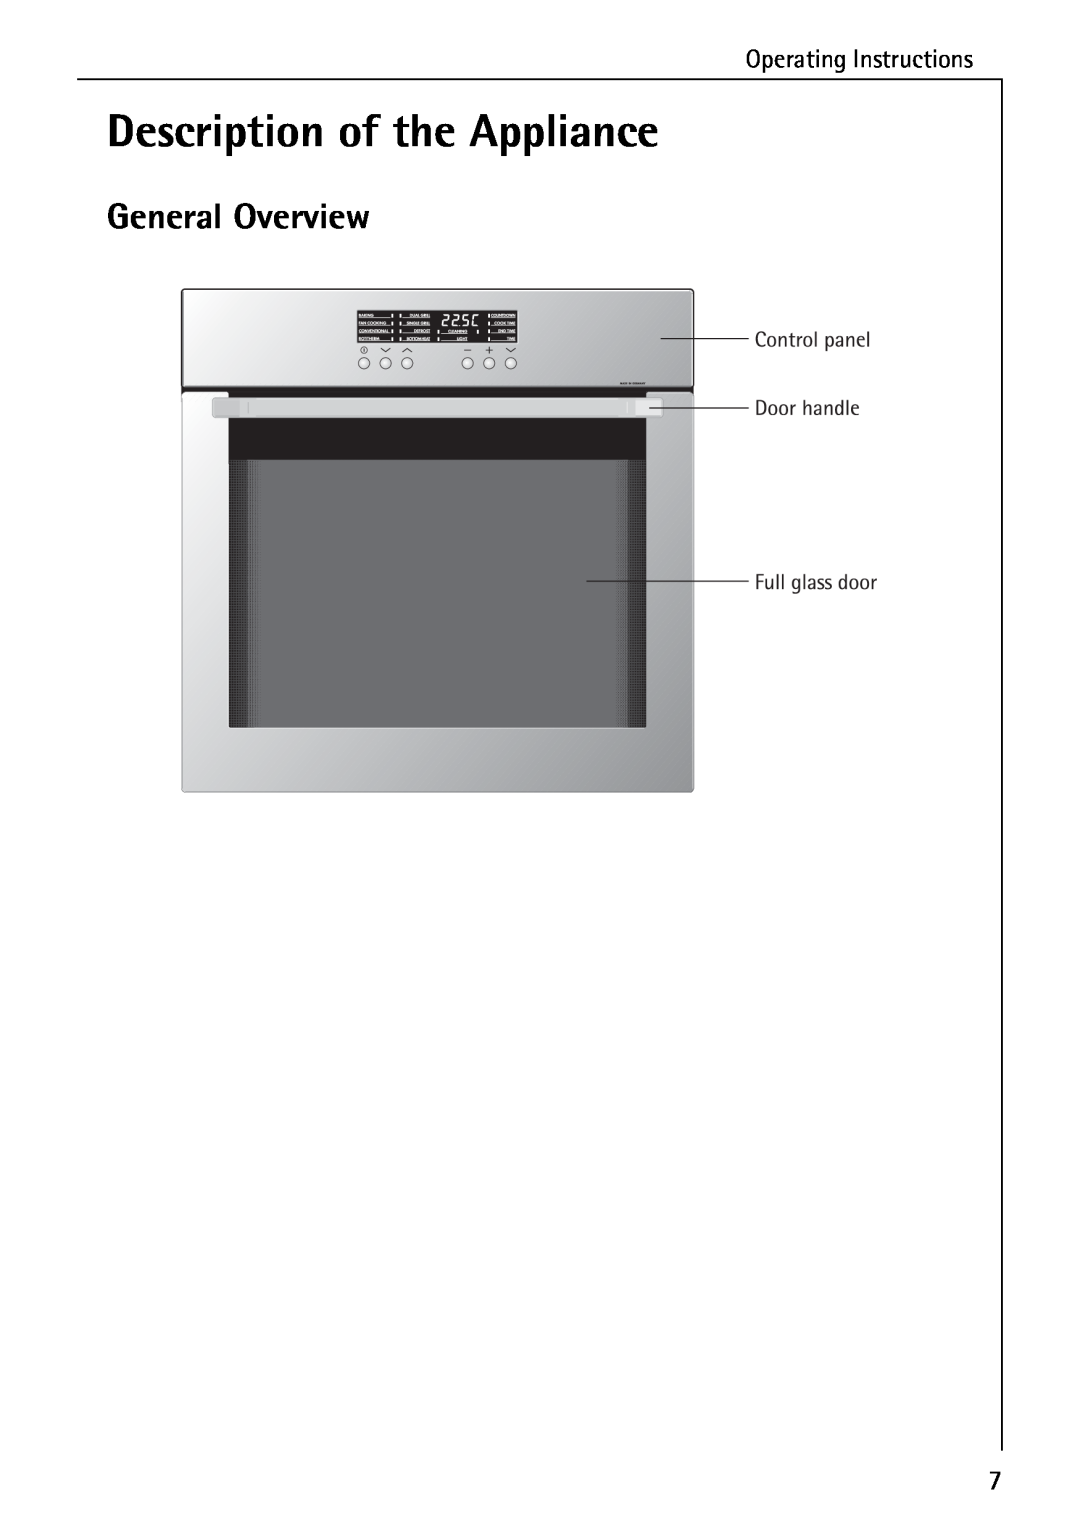 Electrolux B6140-1 manual Description of the Appliance, General Overview, Operating Instructions 